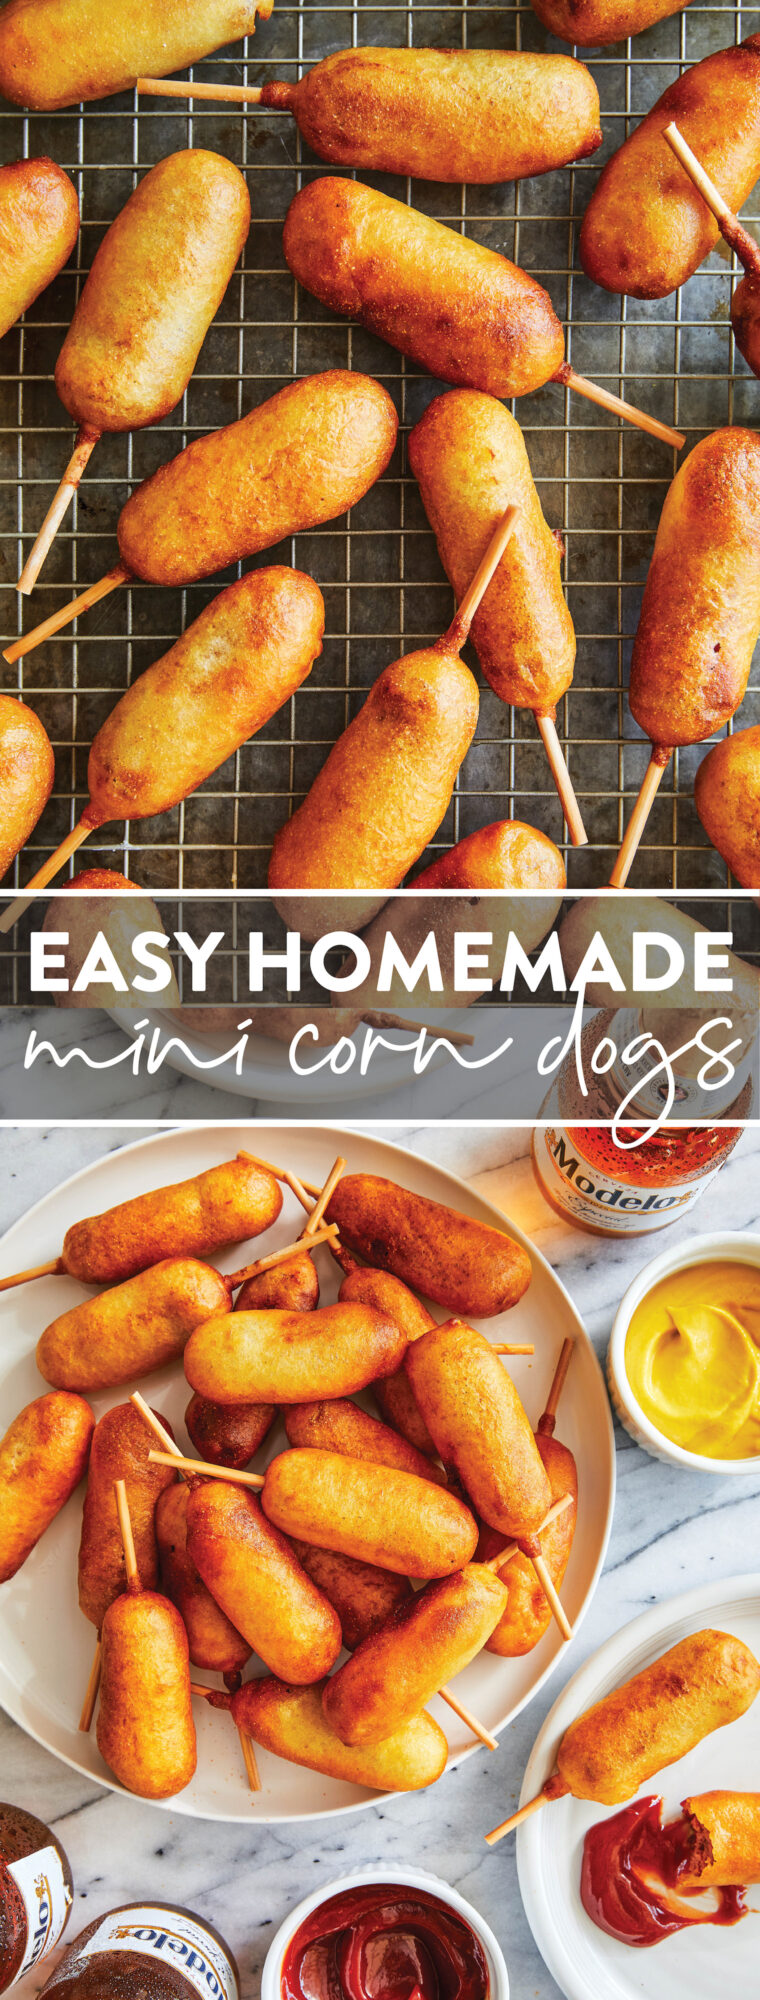 Easy Homemade Mini Corn Dogs - The best corn dogs you can make right at home - tastes just like the state fair. Sure to be a family favorite!